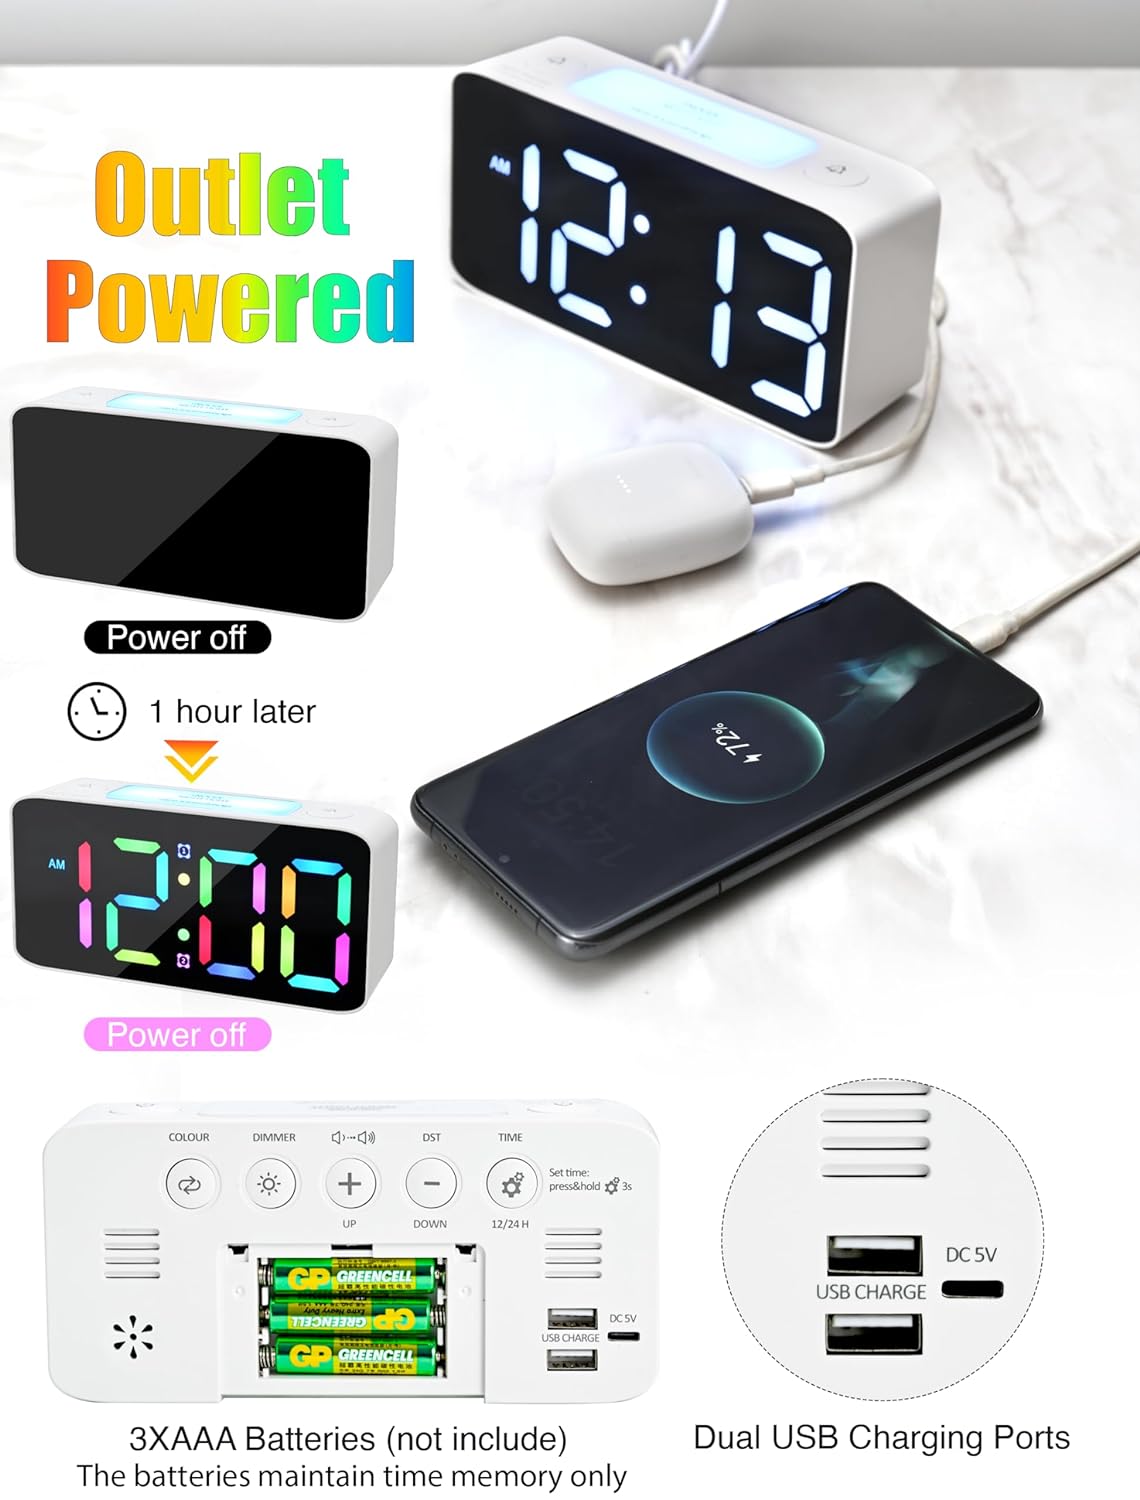 AYRELY Digital Alarm Clock for Bedroom - Dual Loud Alarms, Large Night Light with 7 Colors,Adjustable Volume,Dimmer,Desk Clock with USB Charger, Ok to Wake Up for Kids,Teens